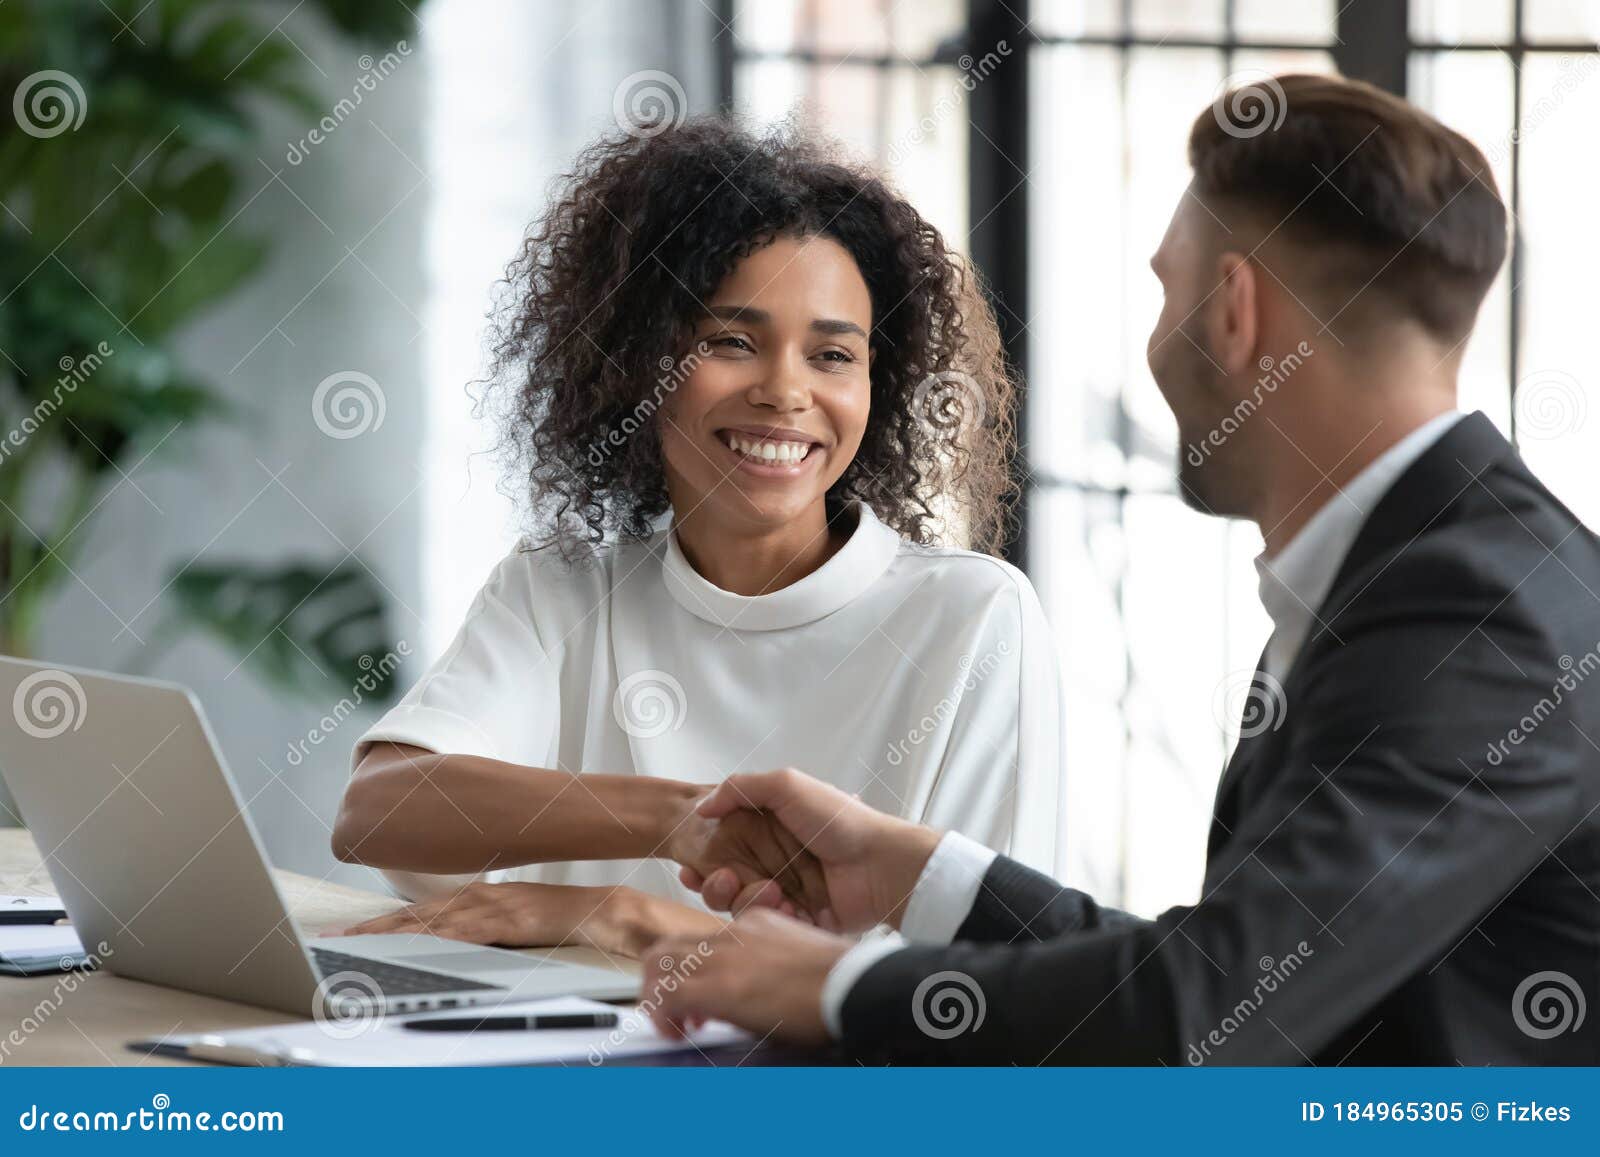 smiling african american businesswoman shaking client hand at meeting